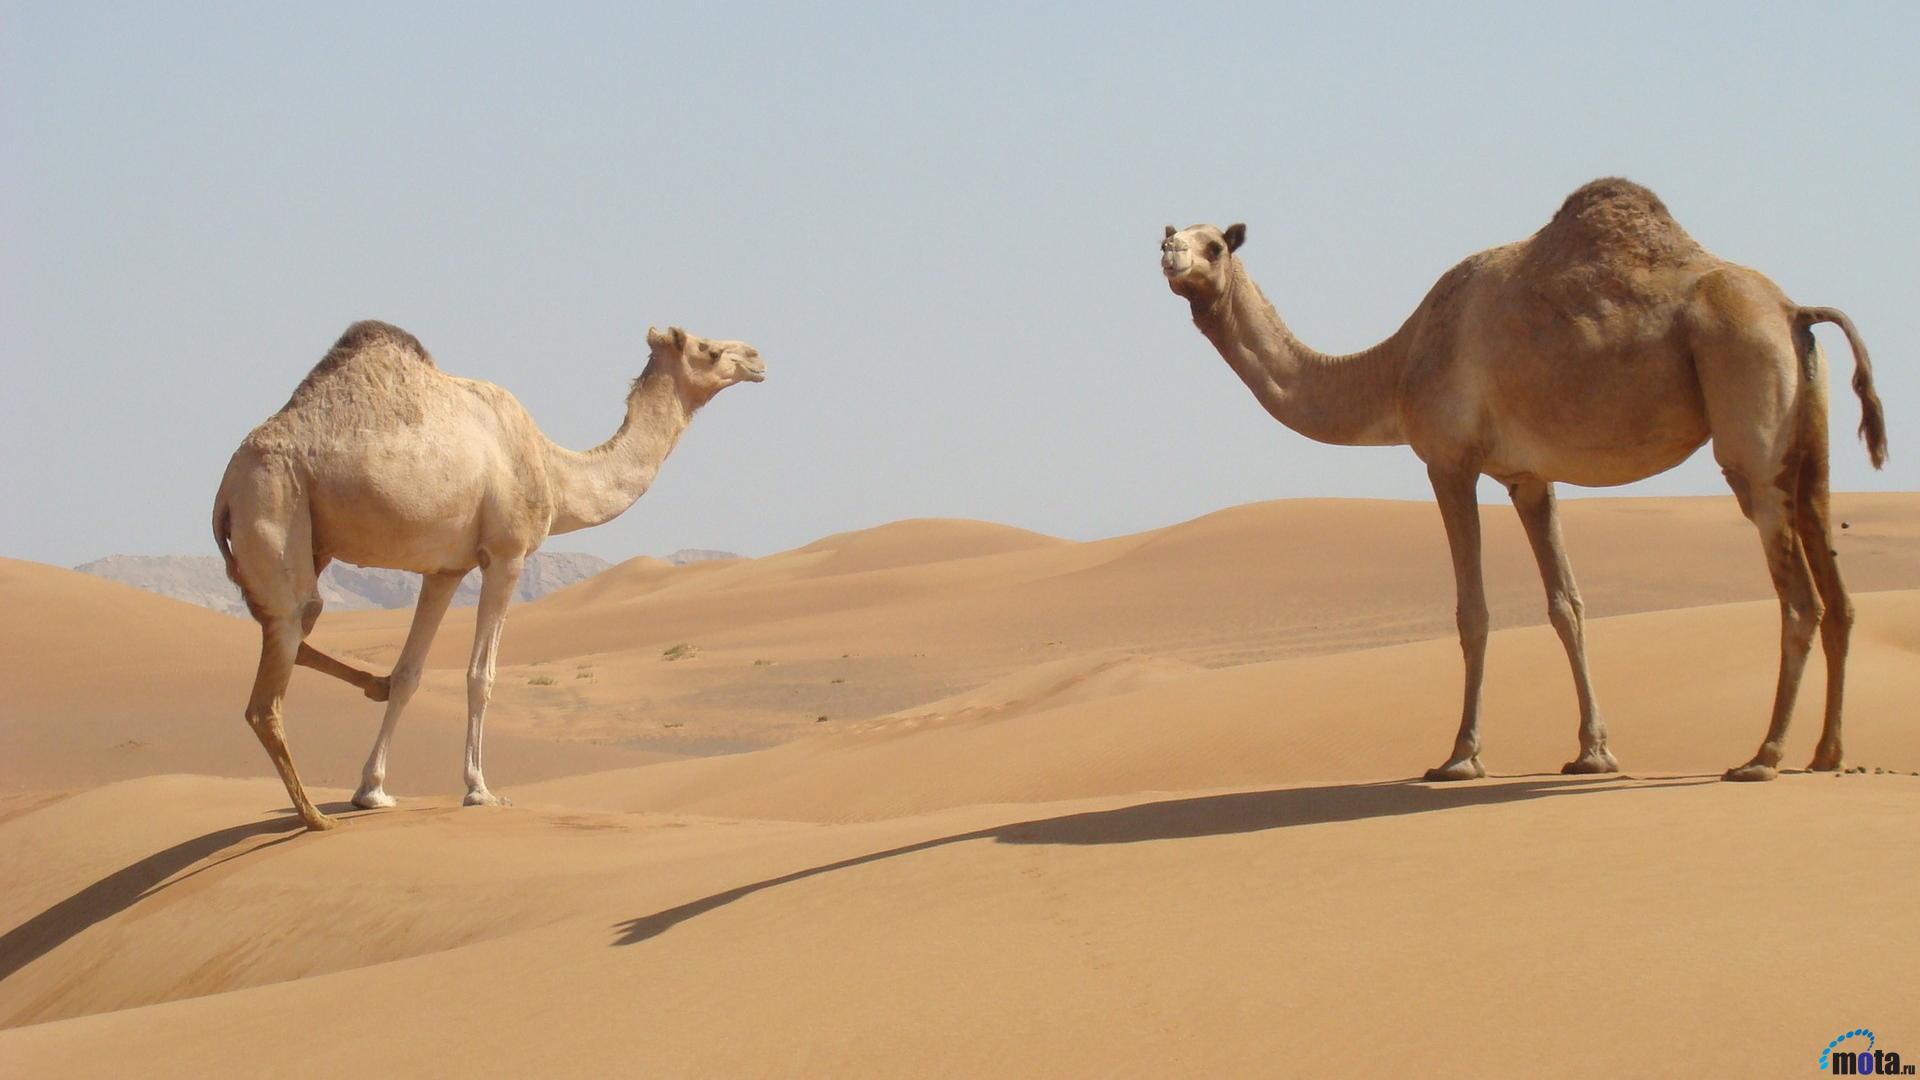 Wallpaper Two Camels In The Desert X